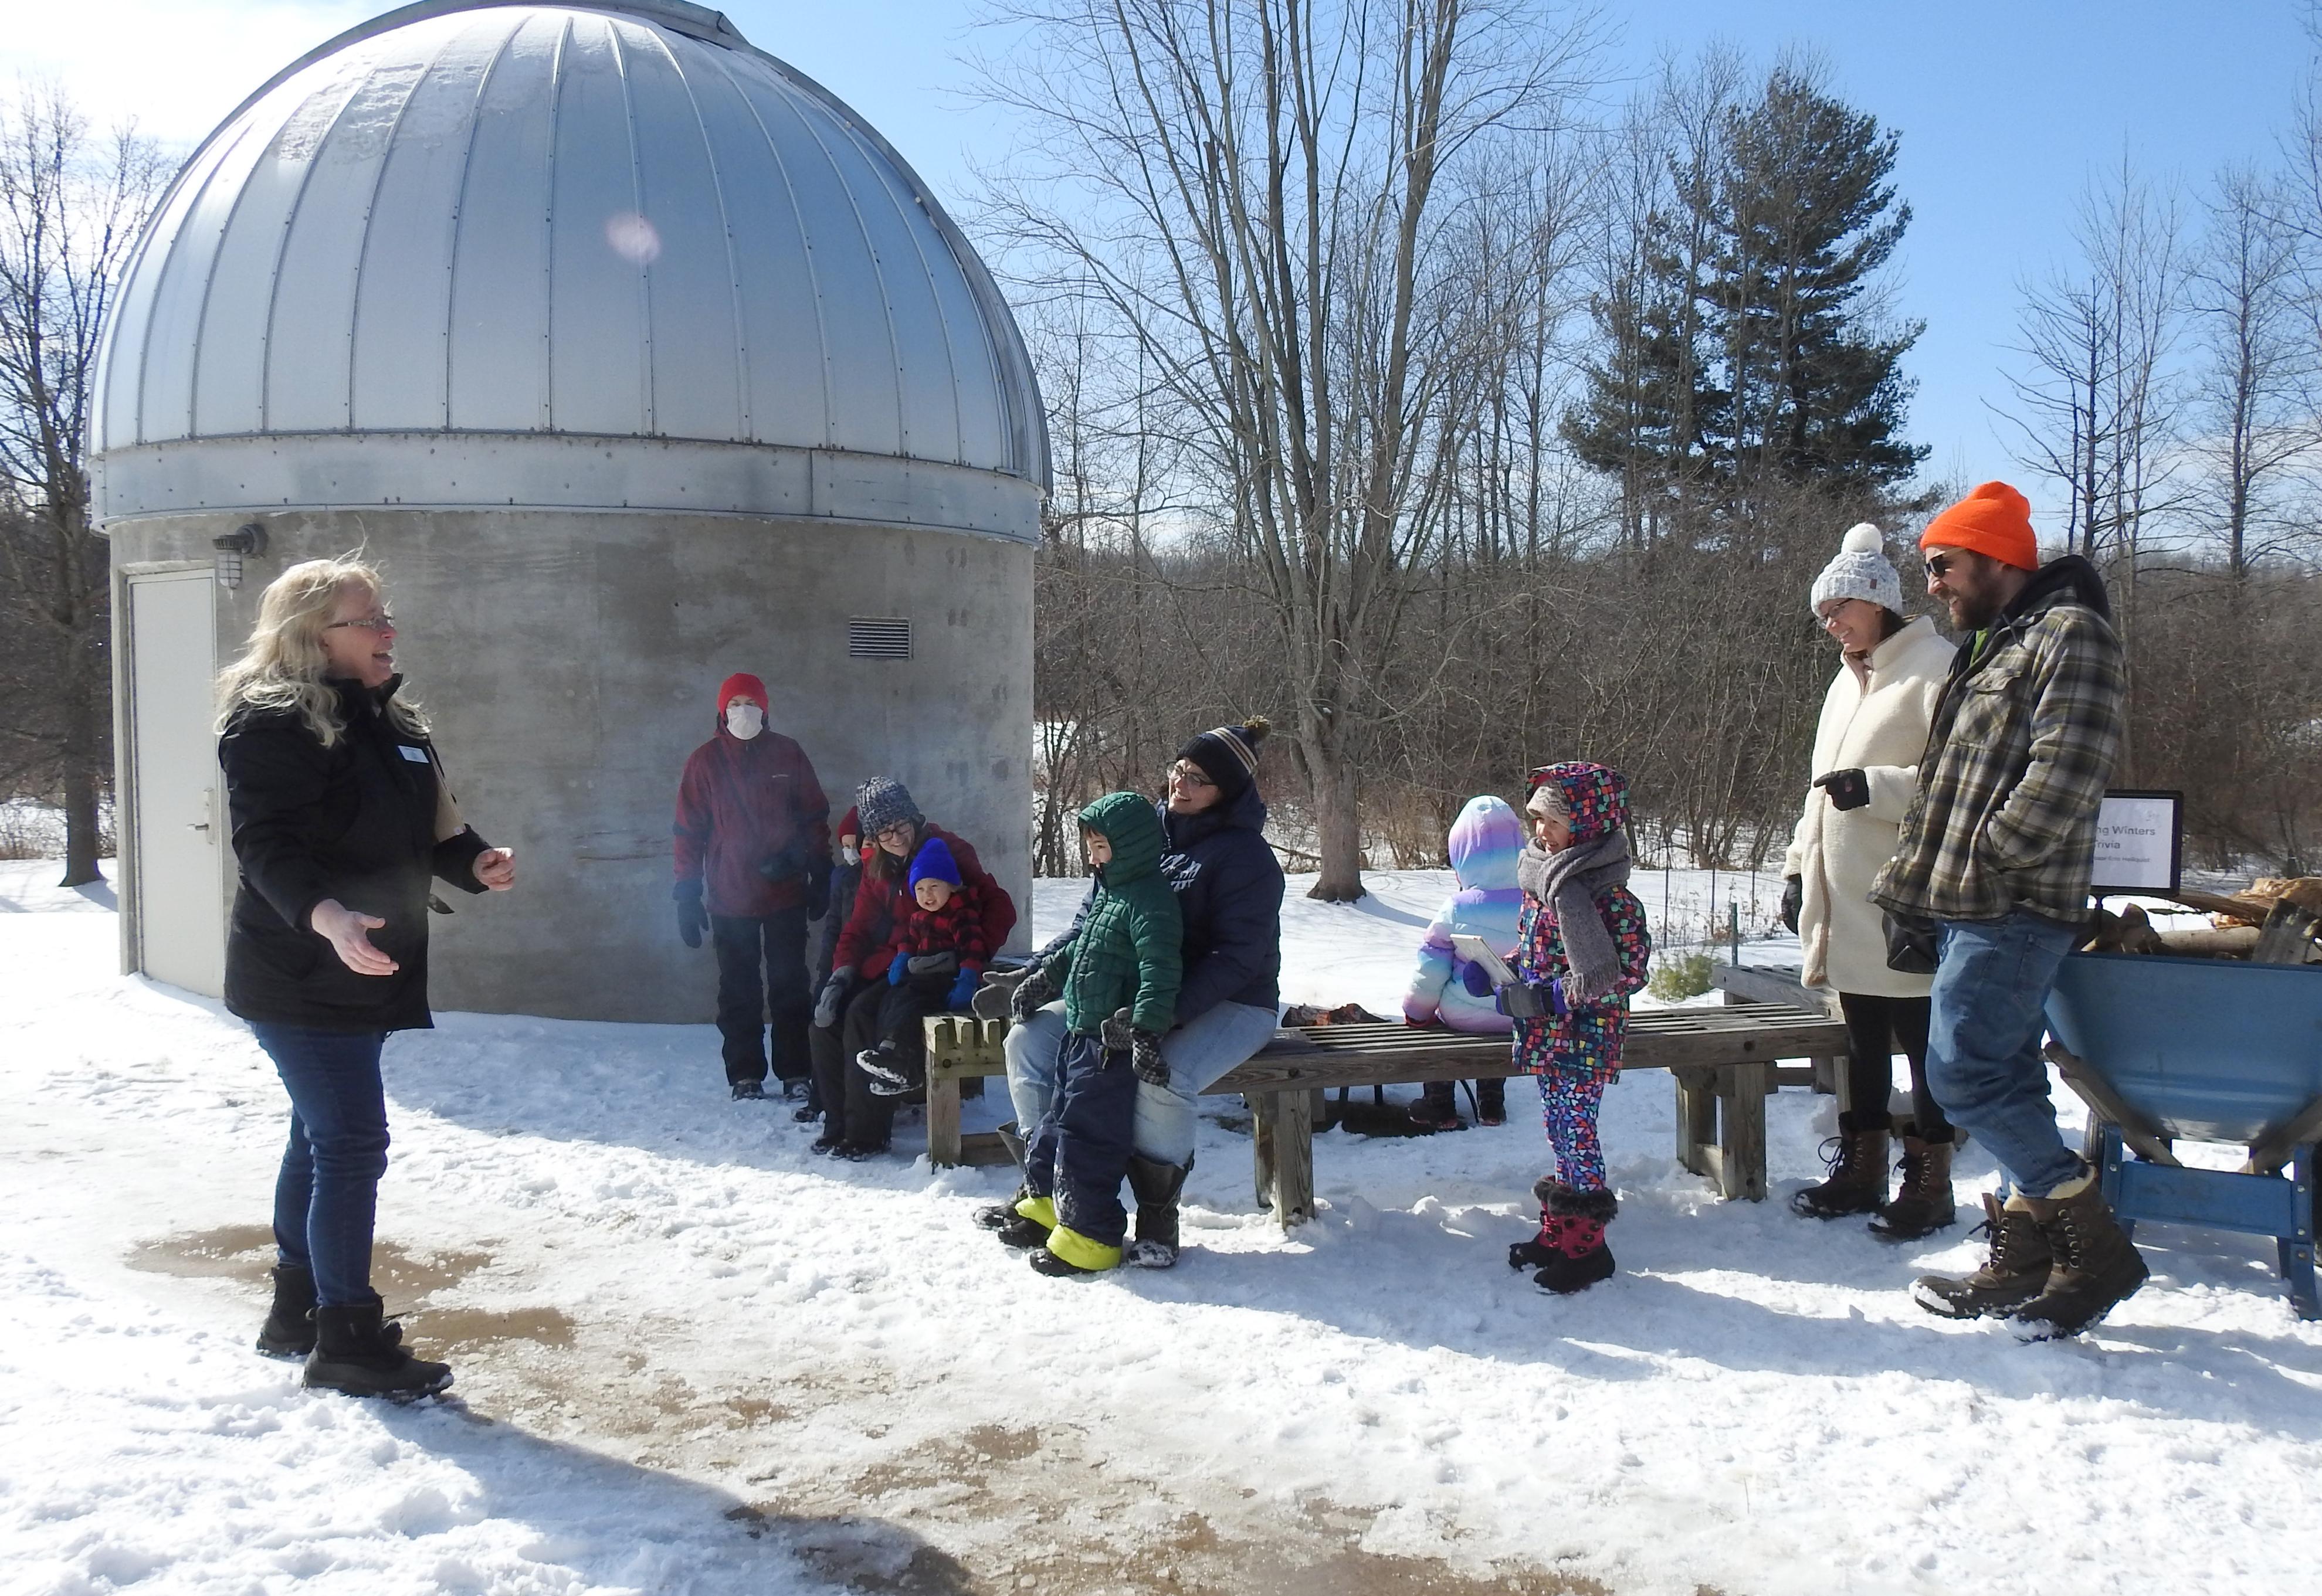 Families take part in the 2023 edition of Celebrate Snow at Rice Creek Field Station